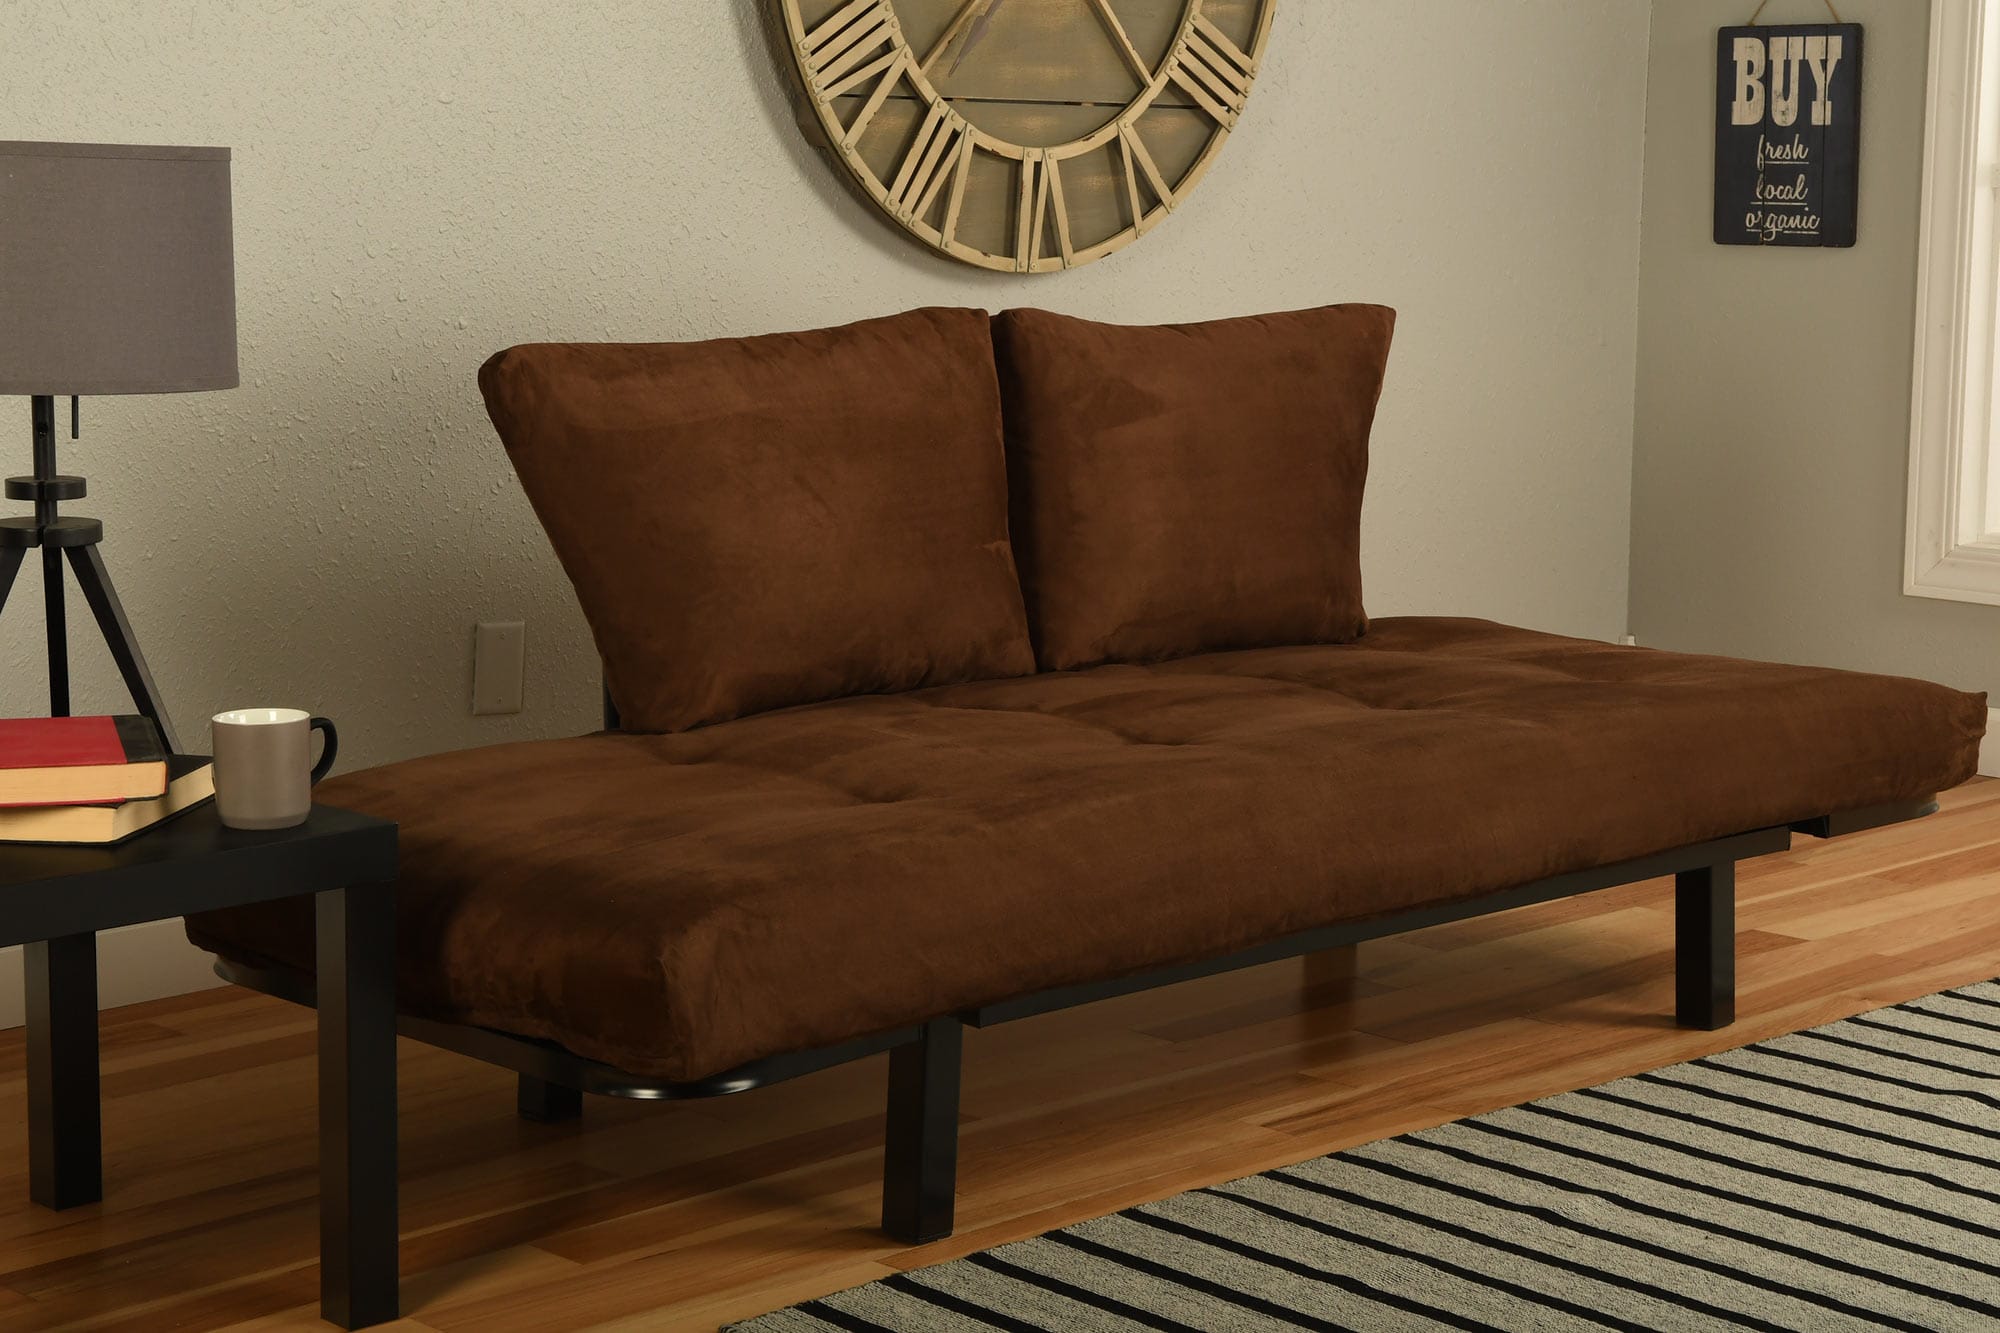 Spacely Futon Daybed/Lounger Mattress Suede Chocolate Kodiak